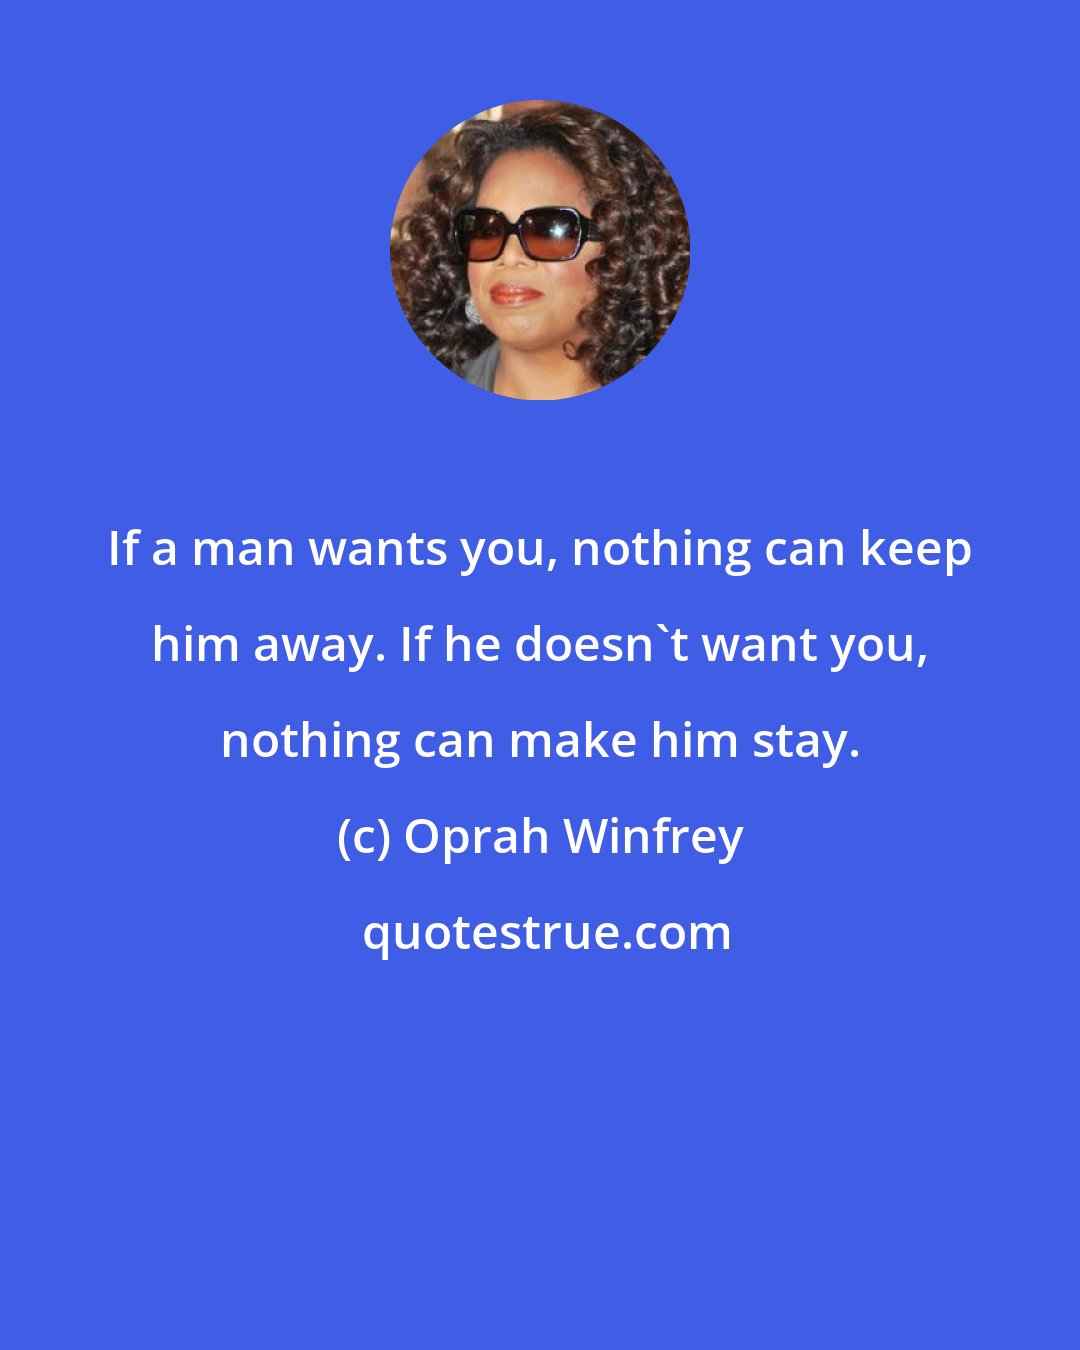 Oprah Winfrey: If a man wants you, nothing can keep him away. If he doesn't want you, nothing can make him stay.